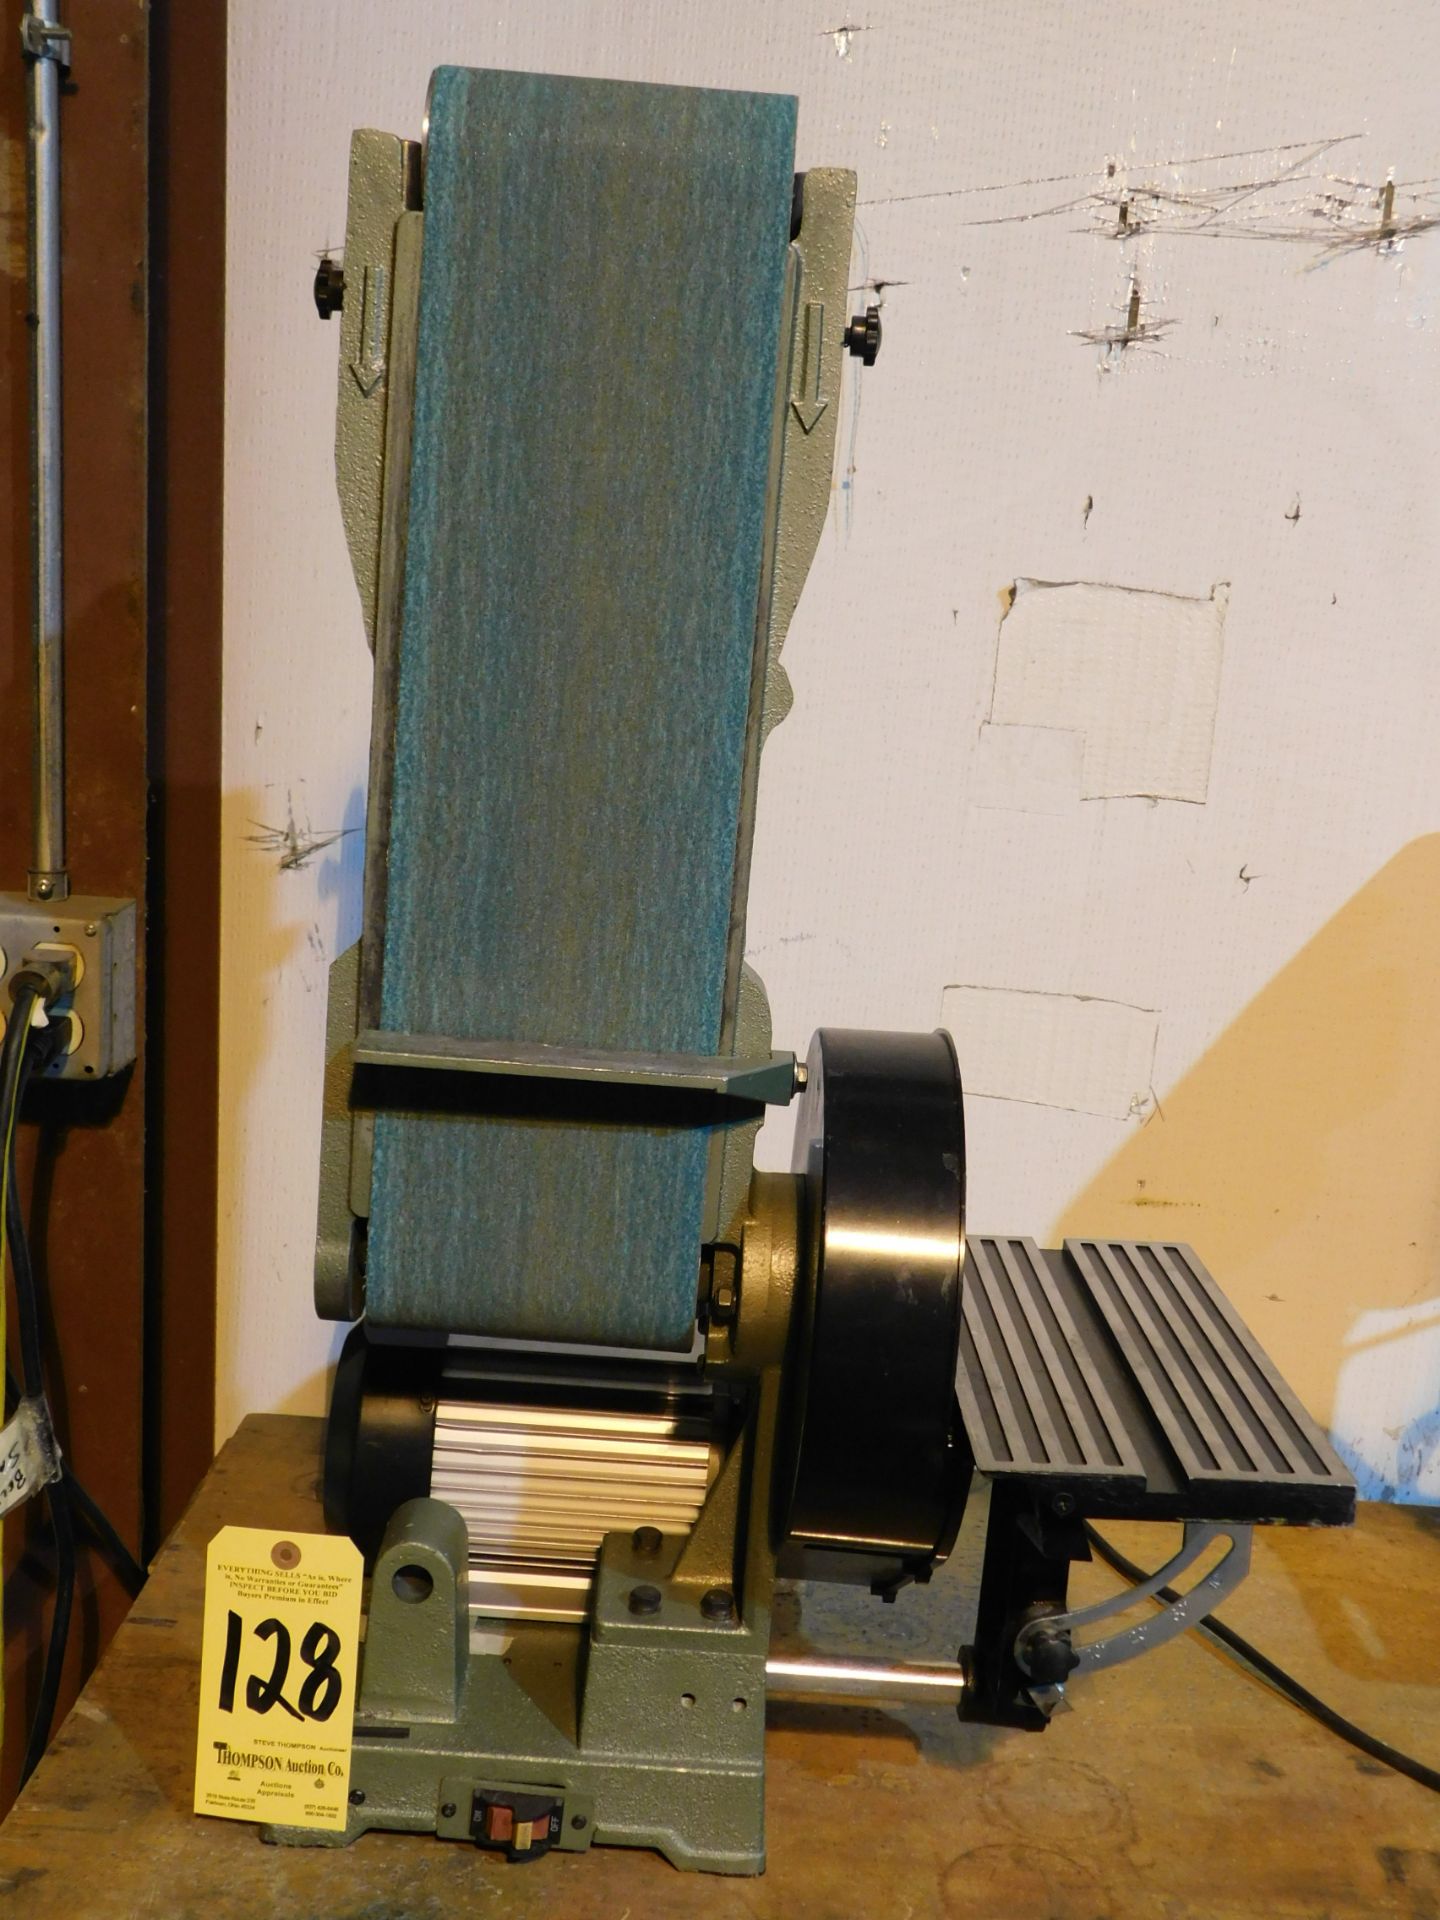 Central Machinery 6" Belt/9" Disc Sander, 115V, 1 phase, Lot Location 3204 Olympia Dr. A, Lafayette, - Image 2 of 5